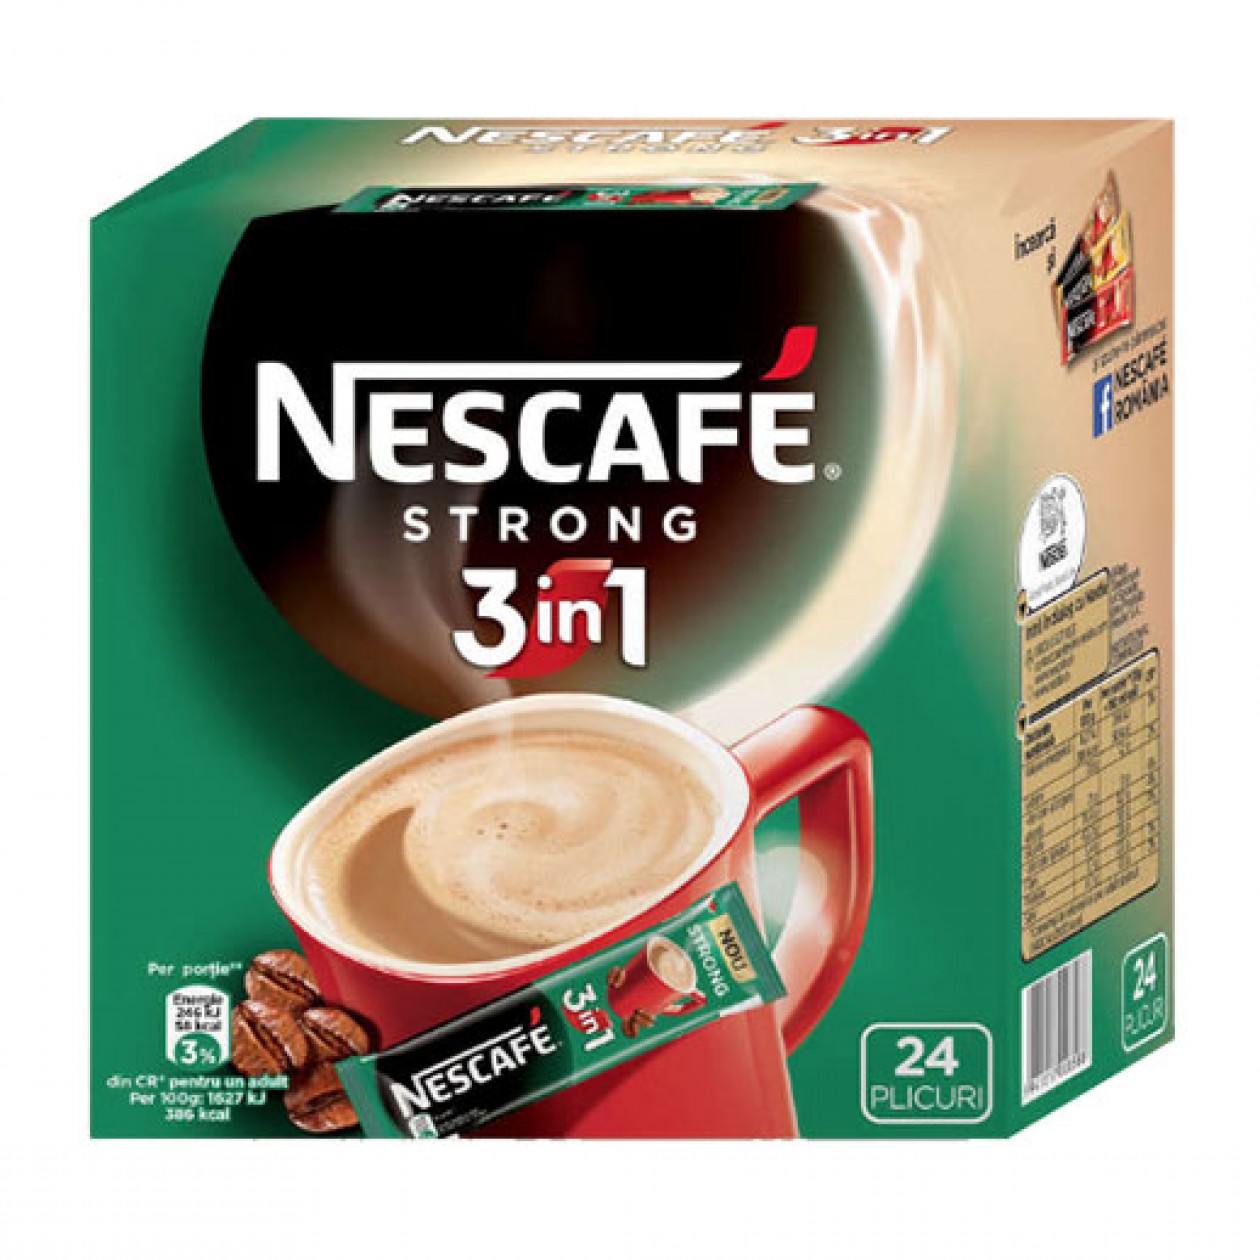 Nescafe Coffee 3 in 1 Strong 24x15g